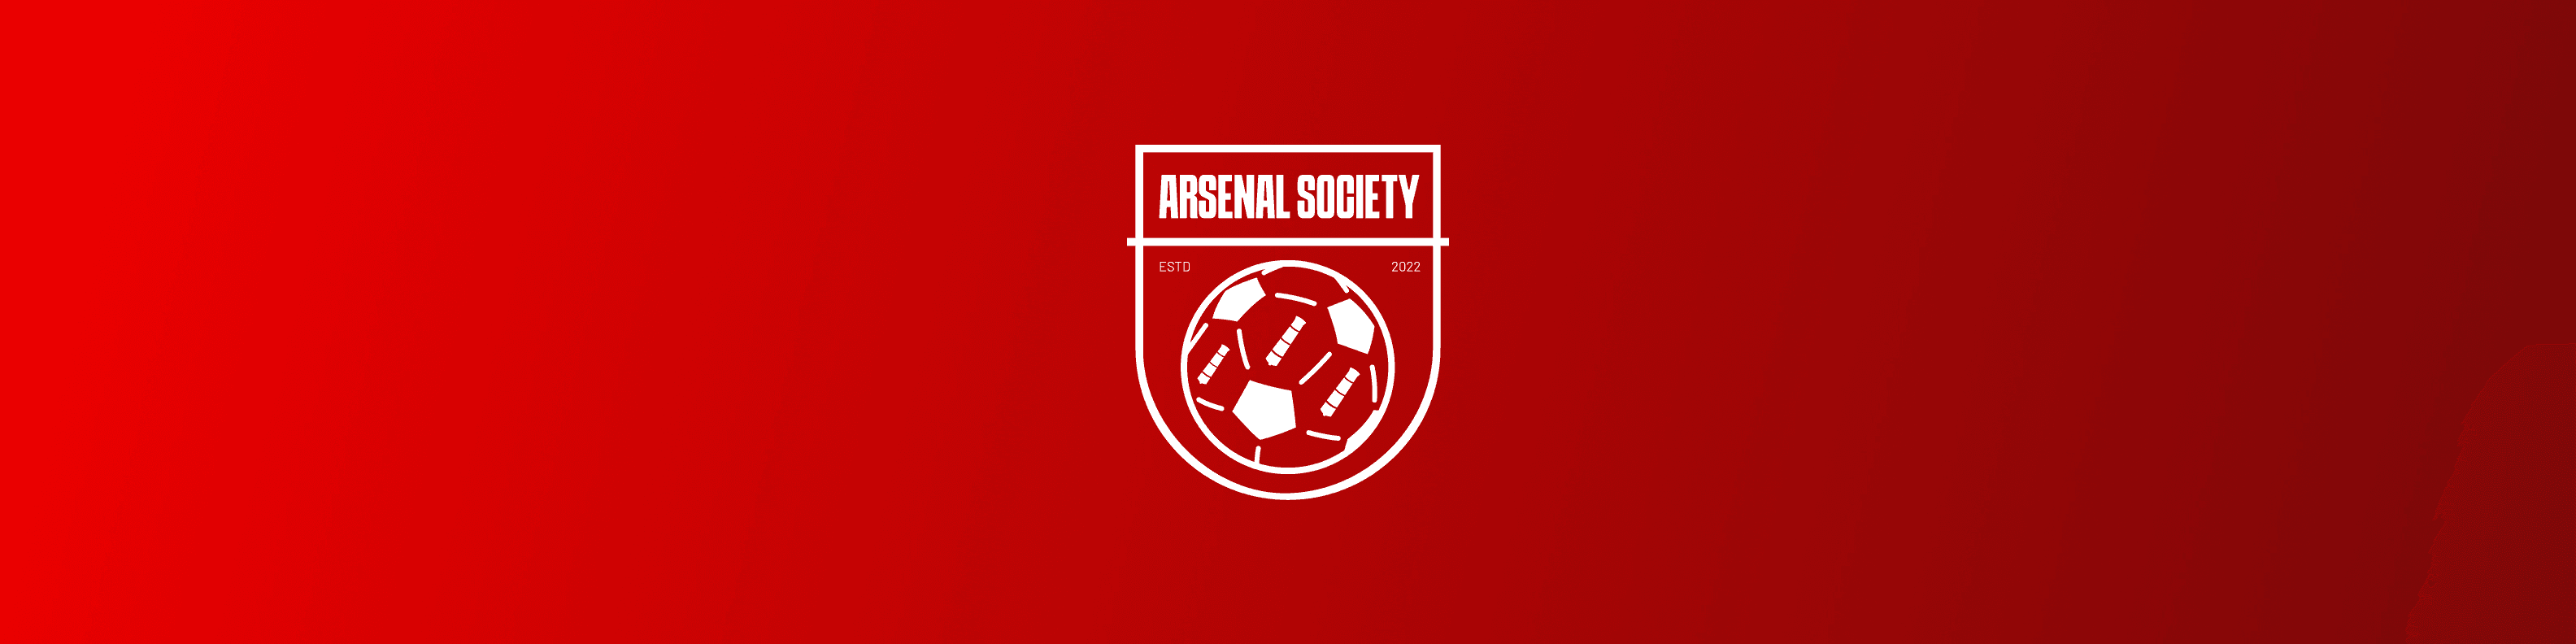 Arsenal Society Clubhouse